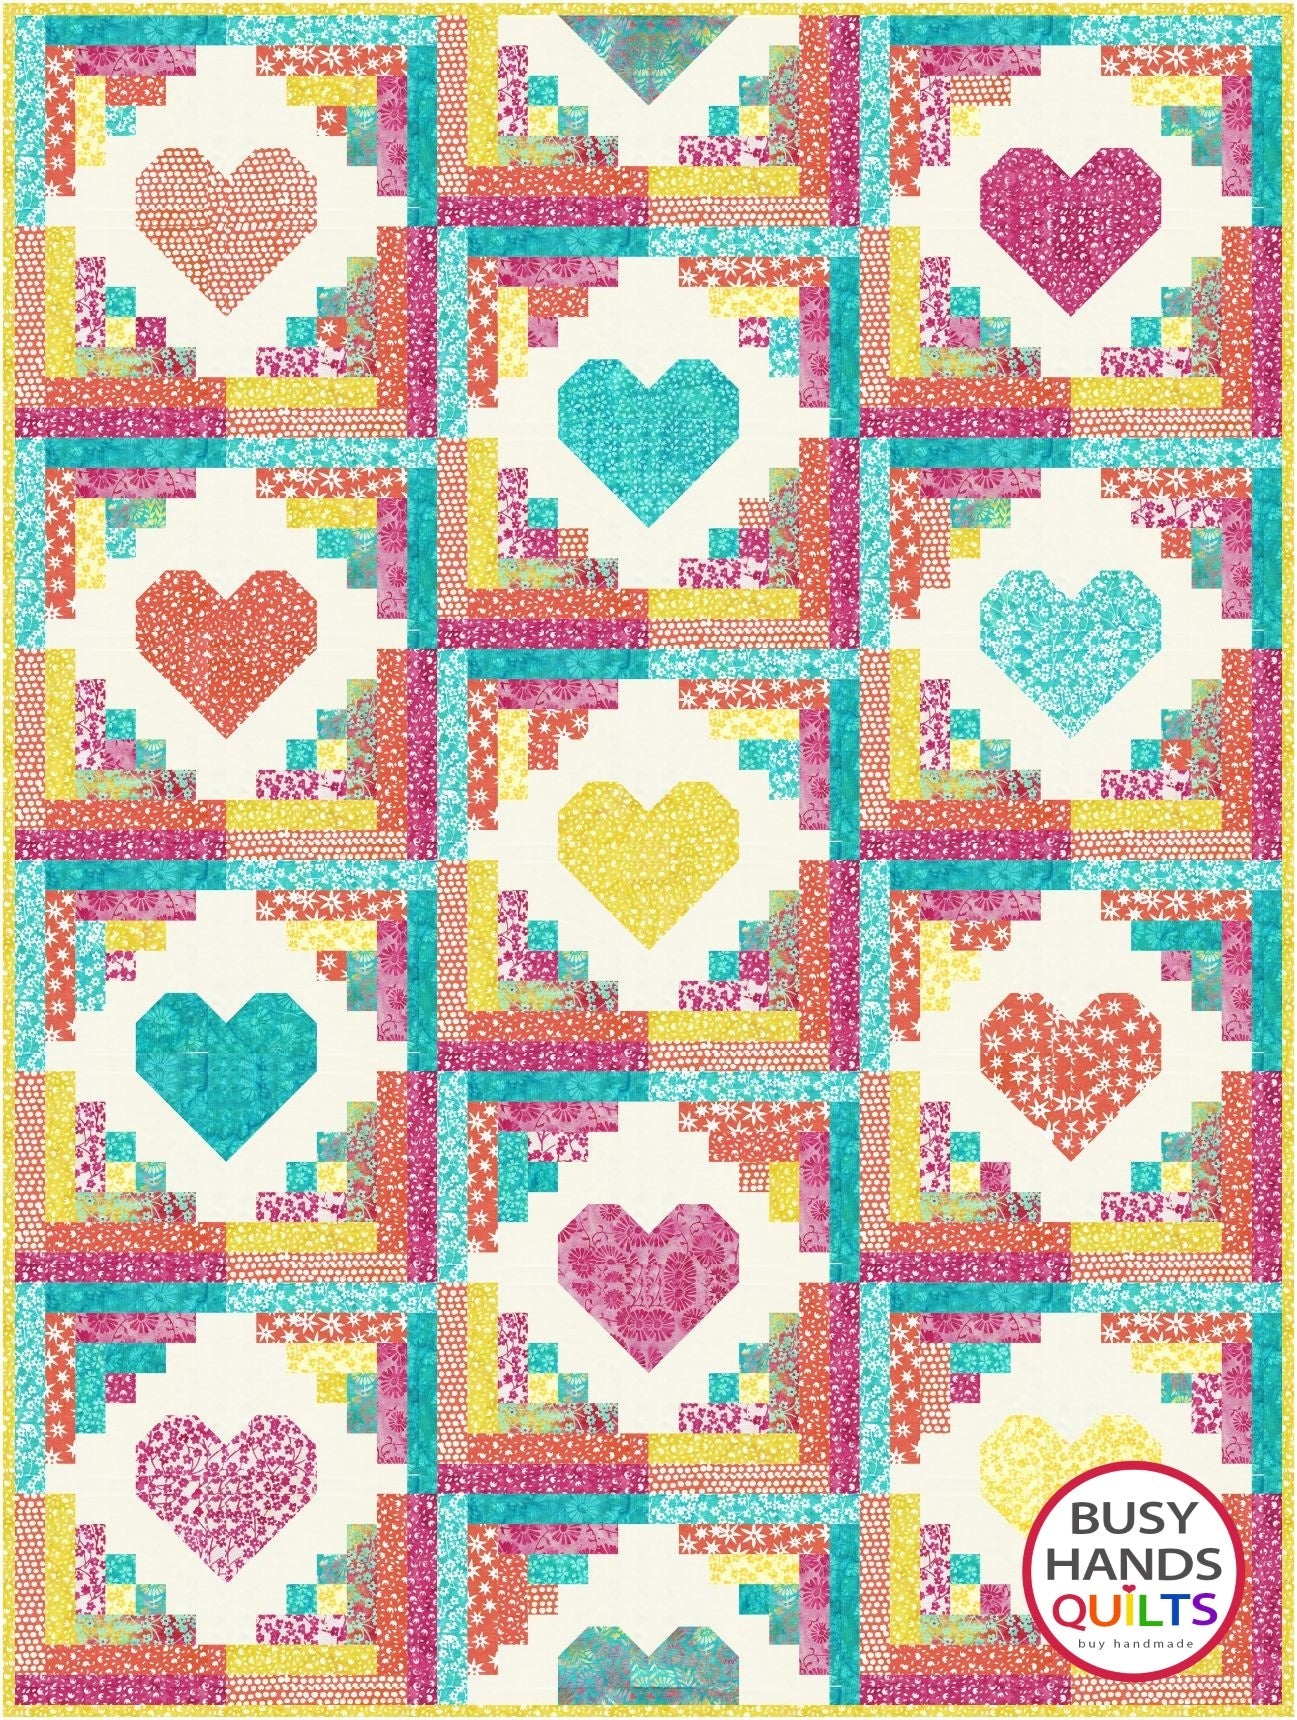 Quilty Cabins Quilt Pattern PDF DOWNLOAD Busy Hands Quilts $12.99